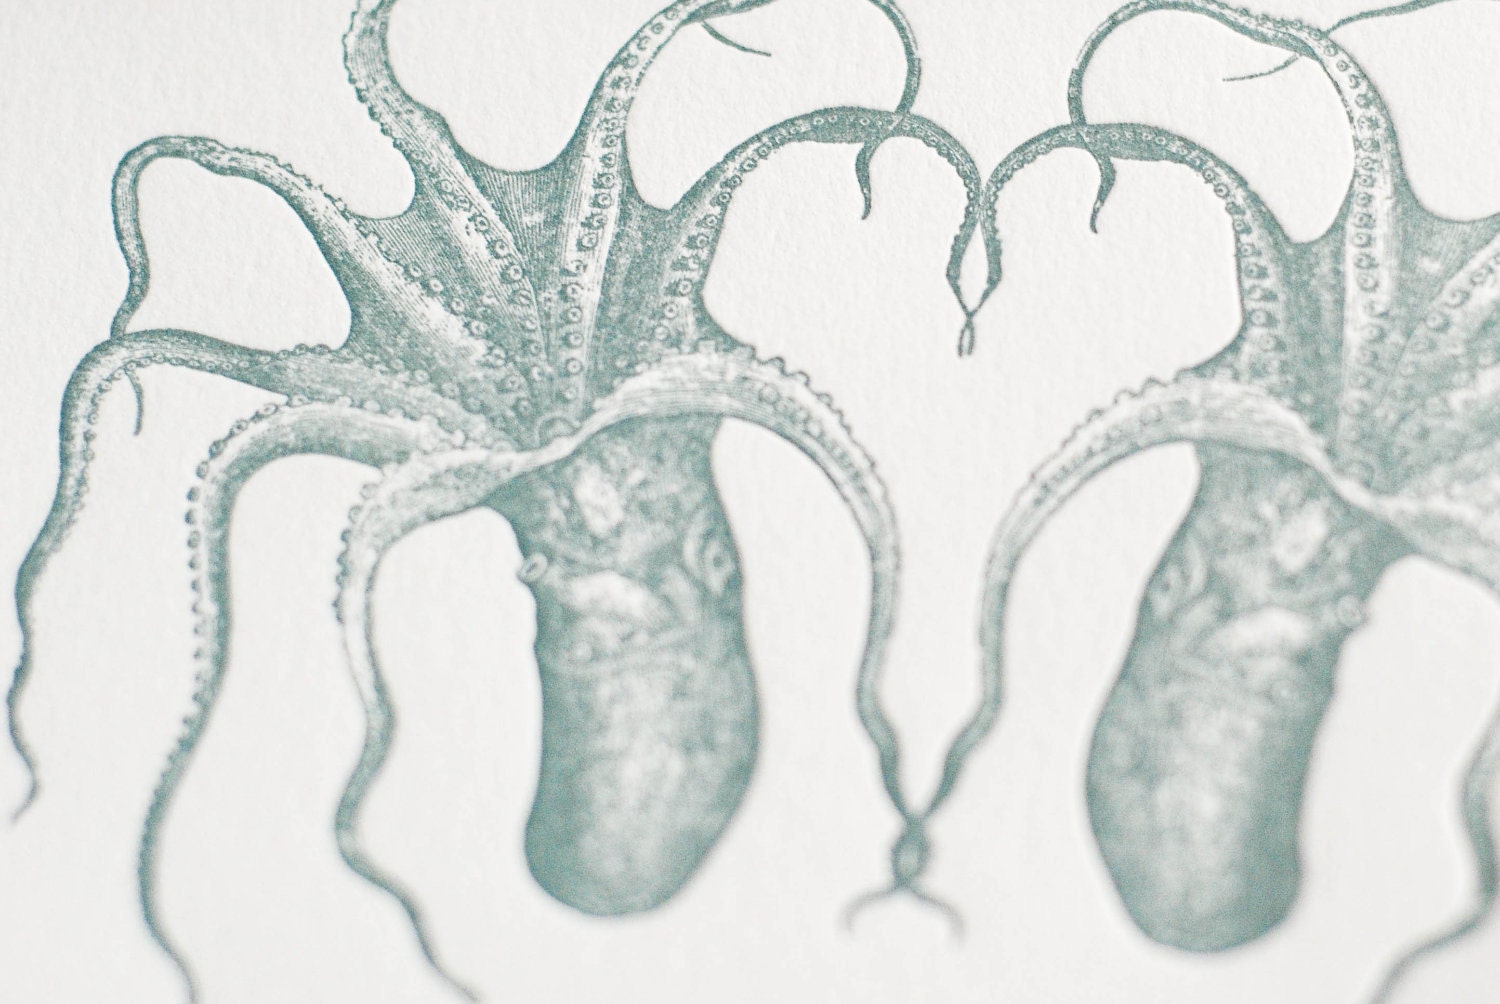 Let's tangle tentacles (a deep sea letterpress valentine in a single card & envelope)